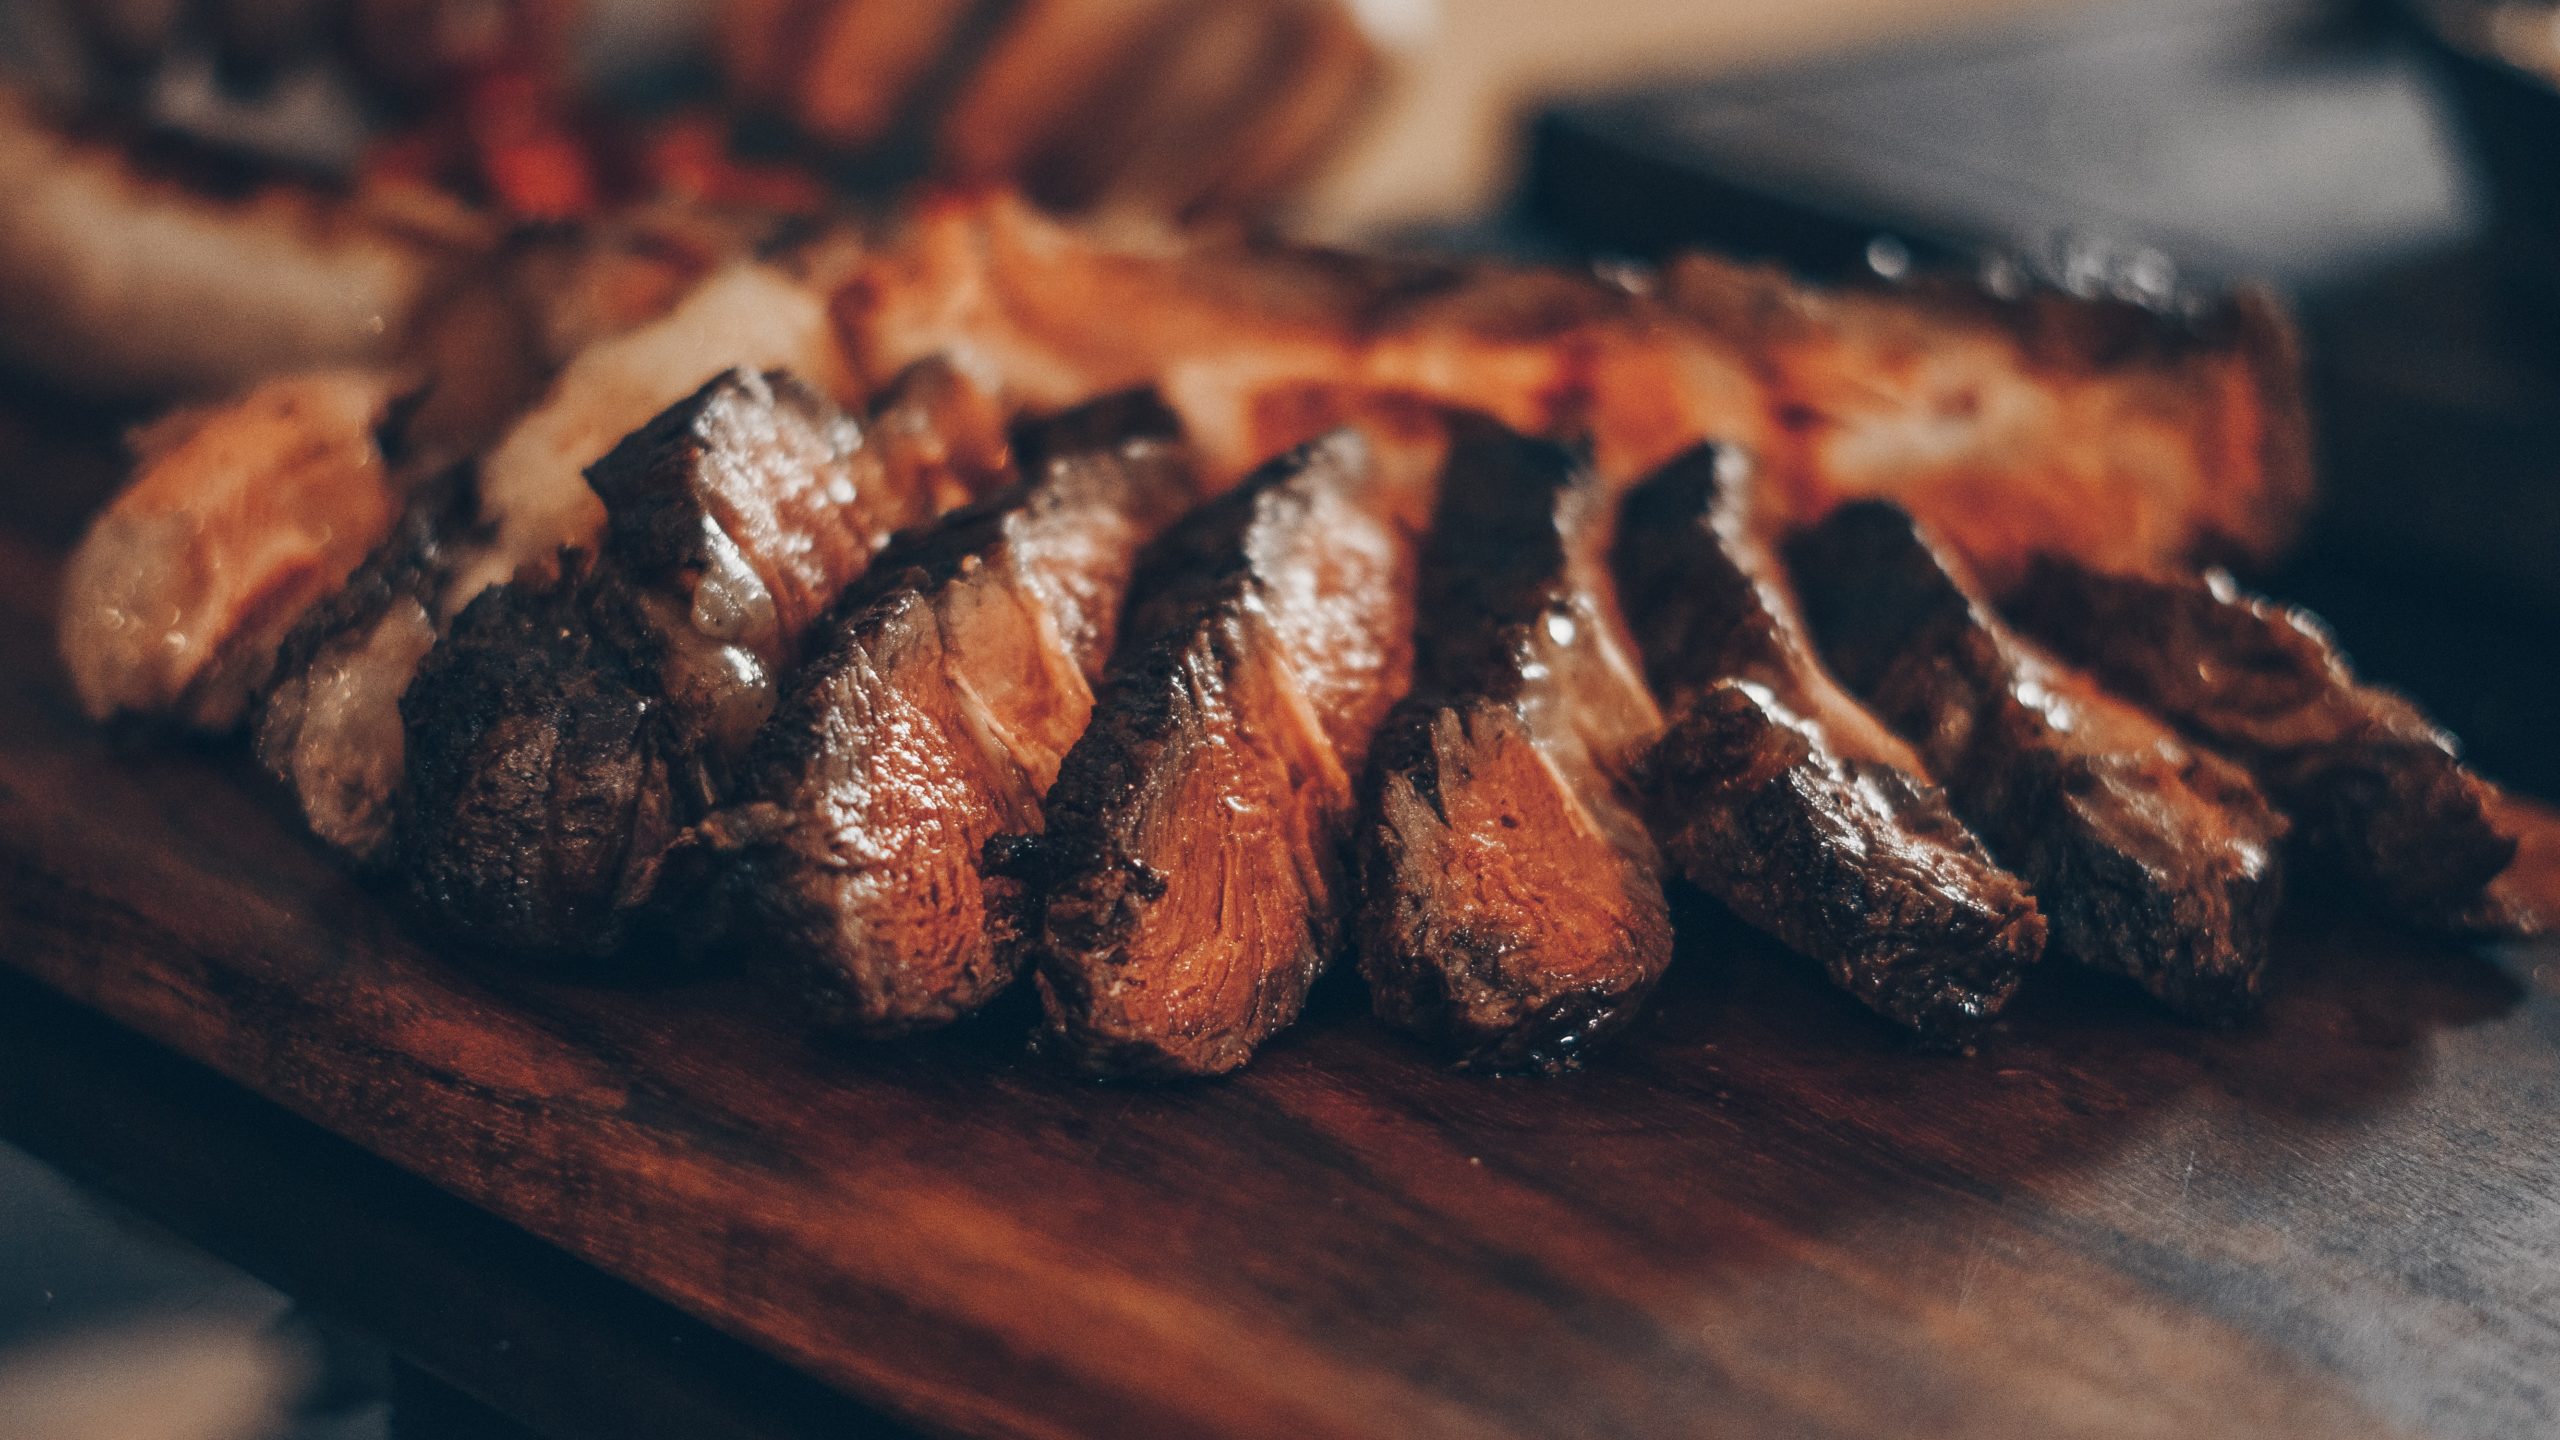 emerson vieira cpkPJ U9eUM unsplash scaled How To Fry The Perfect Steak At Home